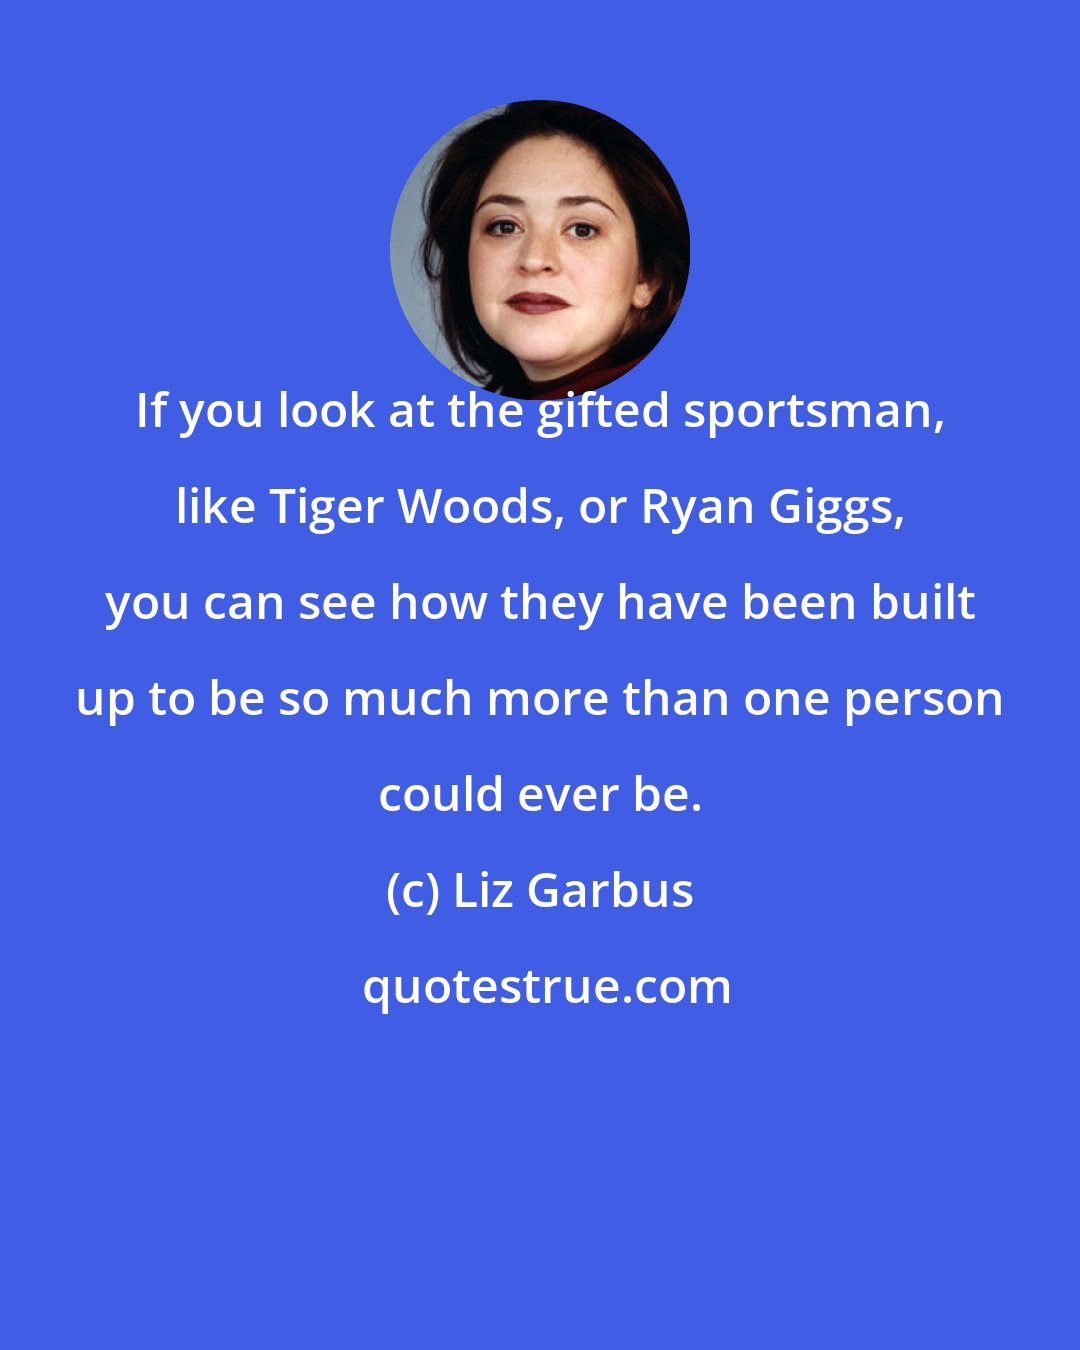 Liz Garbus: If you look at the gifted sportsman, like Tiger Woods, or Ryan Giggs, you can see how they have been built up to be so much more than one person could ever be.